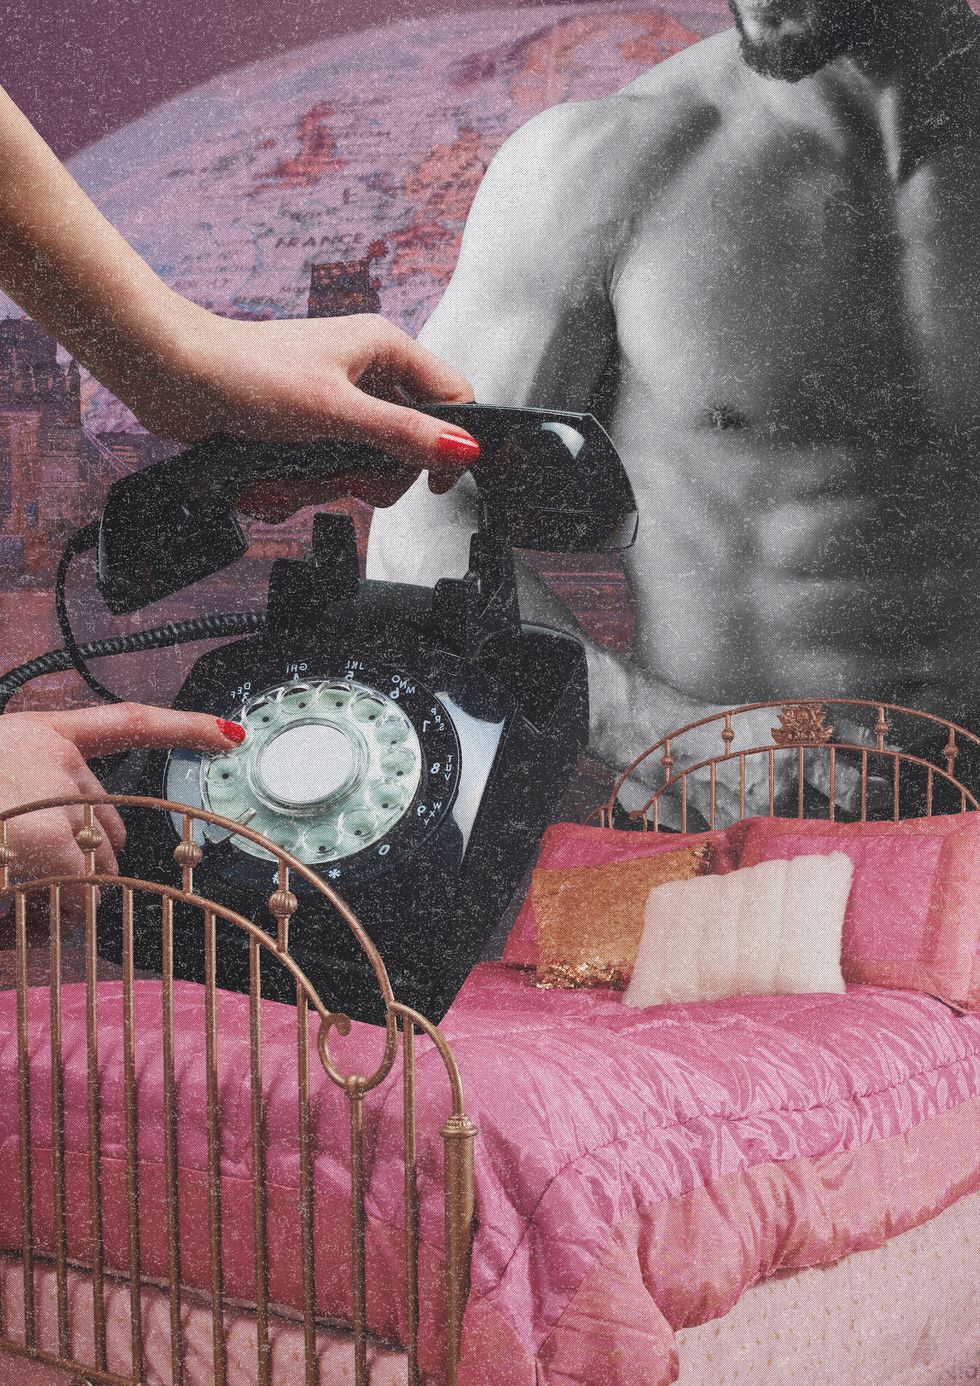 collage of a phone, a hand, a male torso and a pink bed